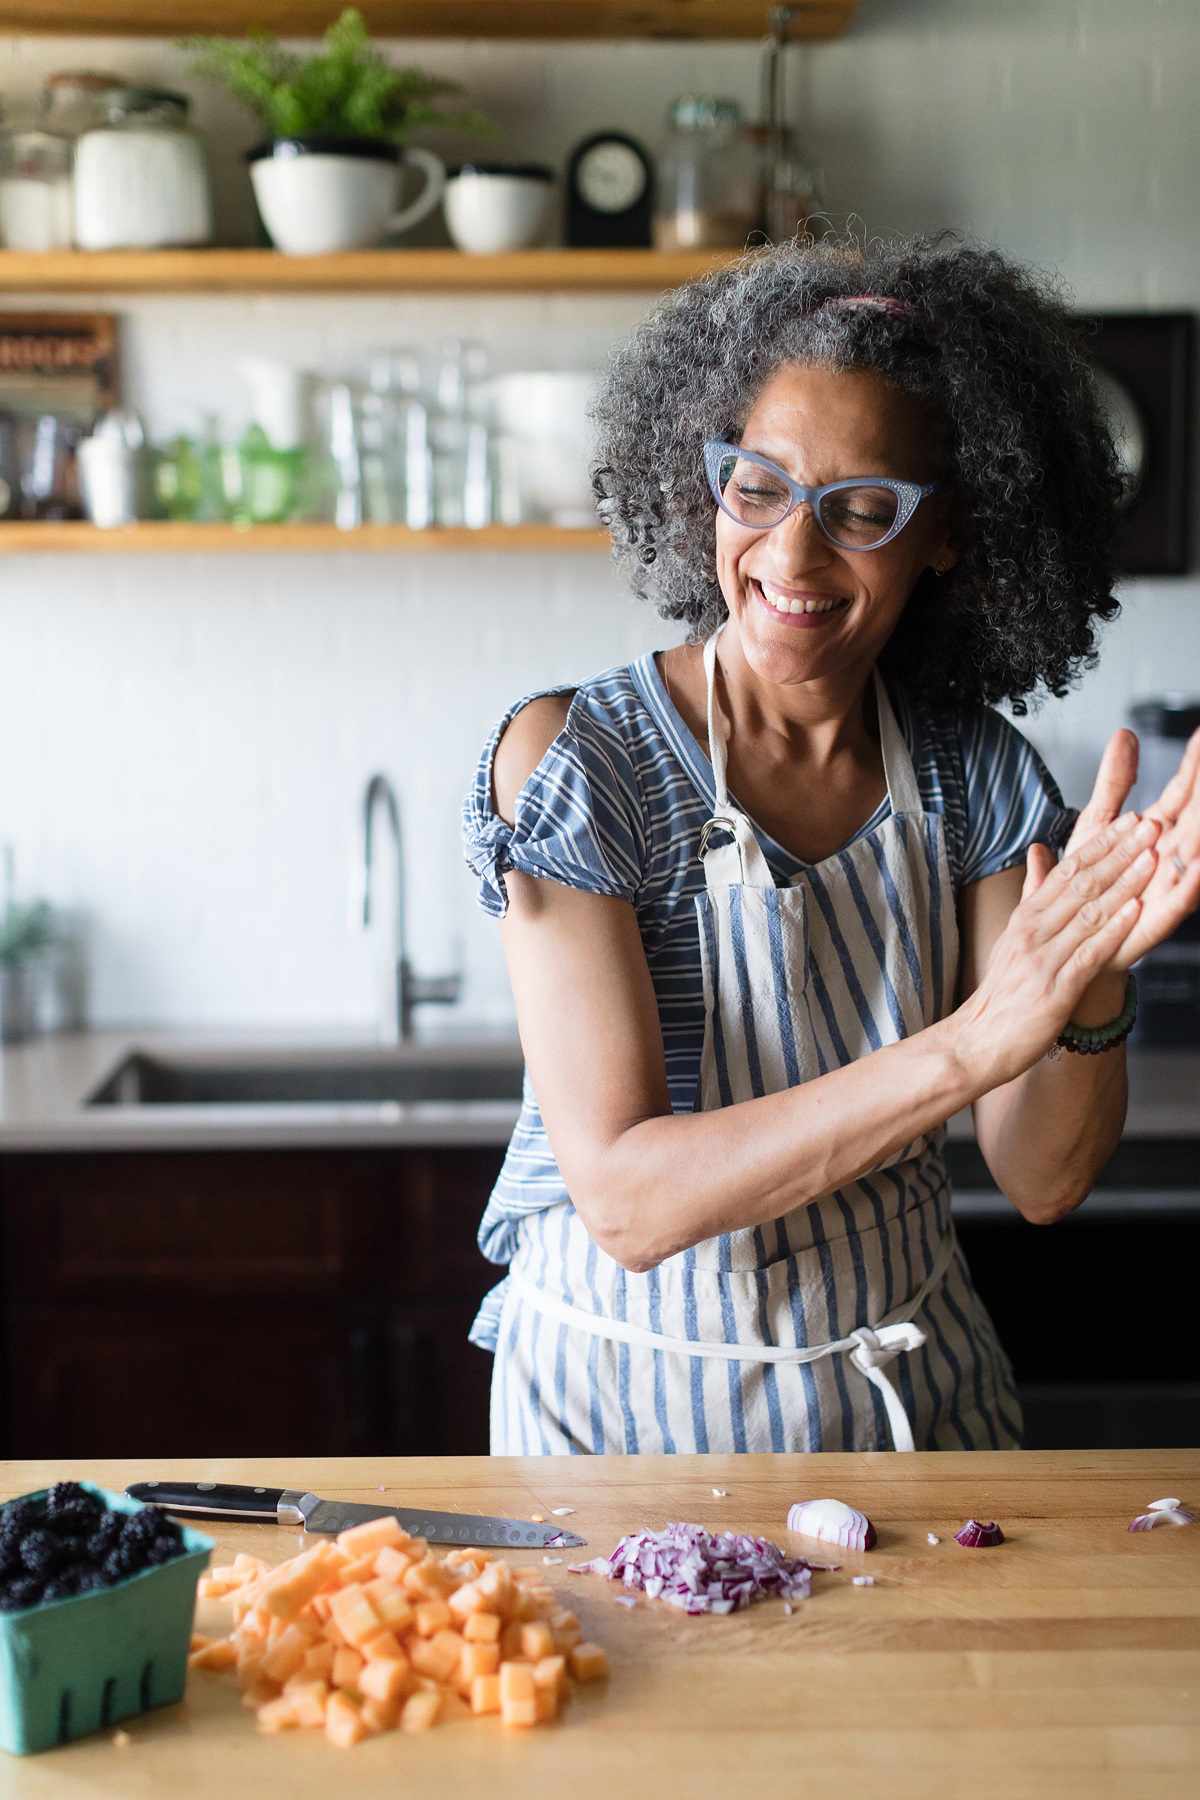 Carla Hall at cutting board laughing and clapping hands